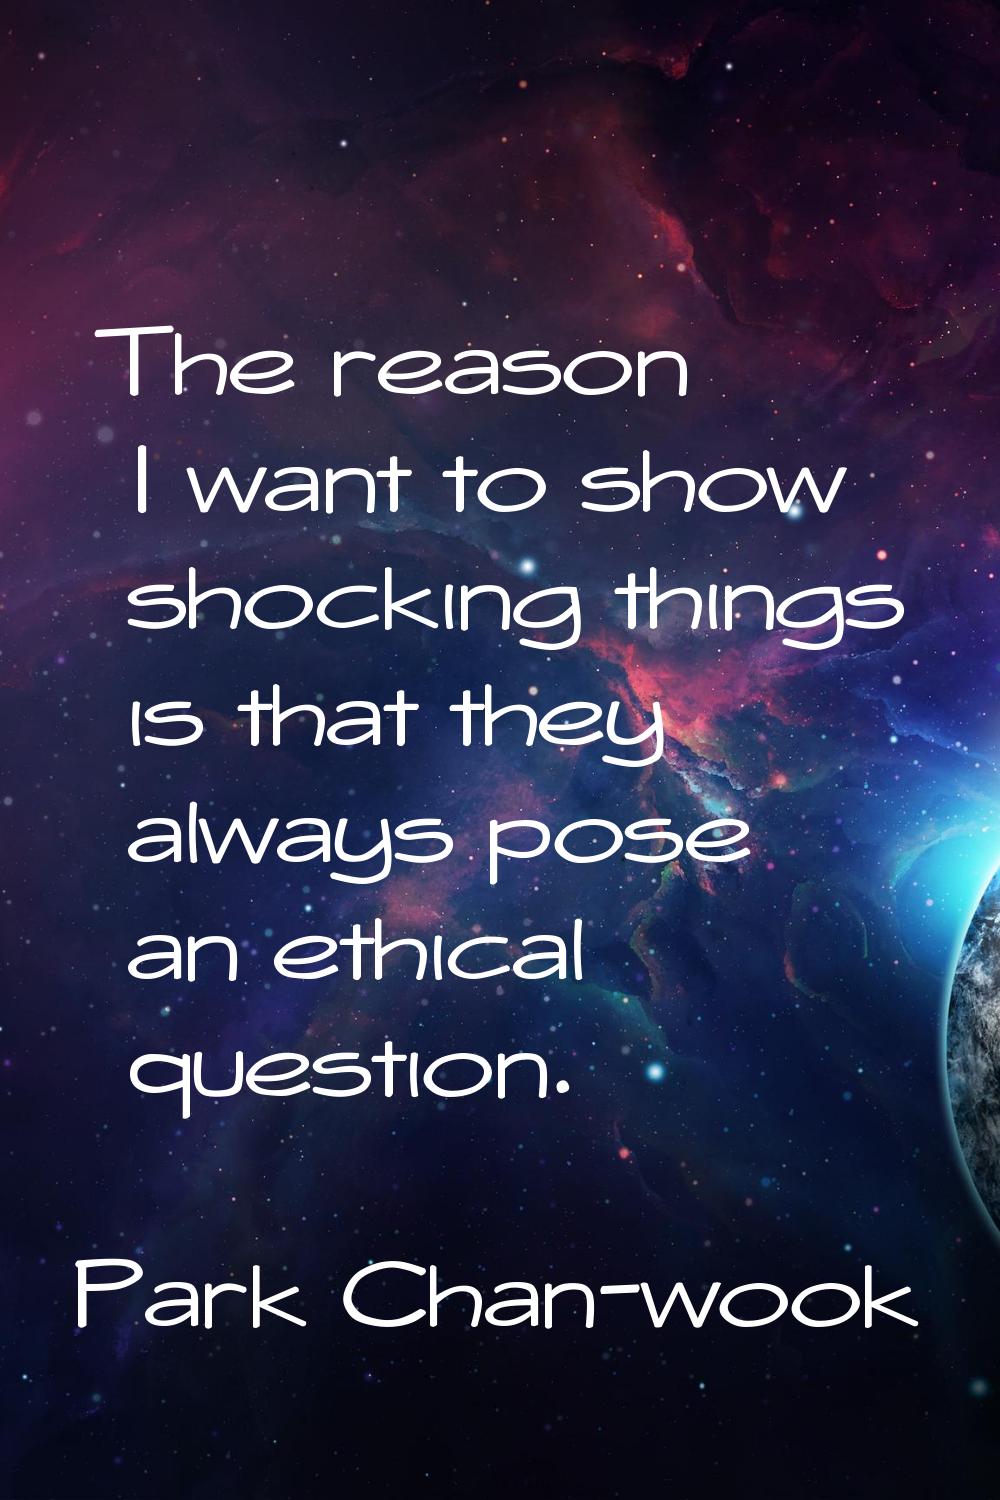 The reason I want to show shocking things is that they always pose an ethical question.